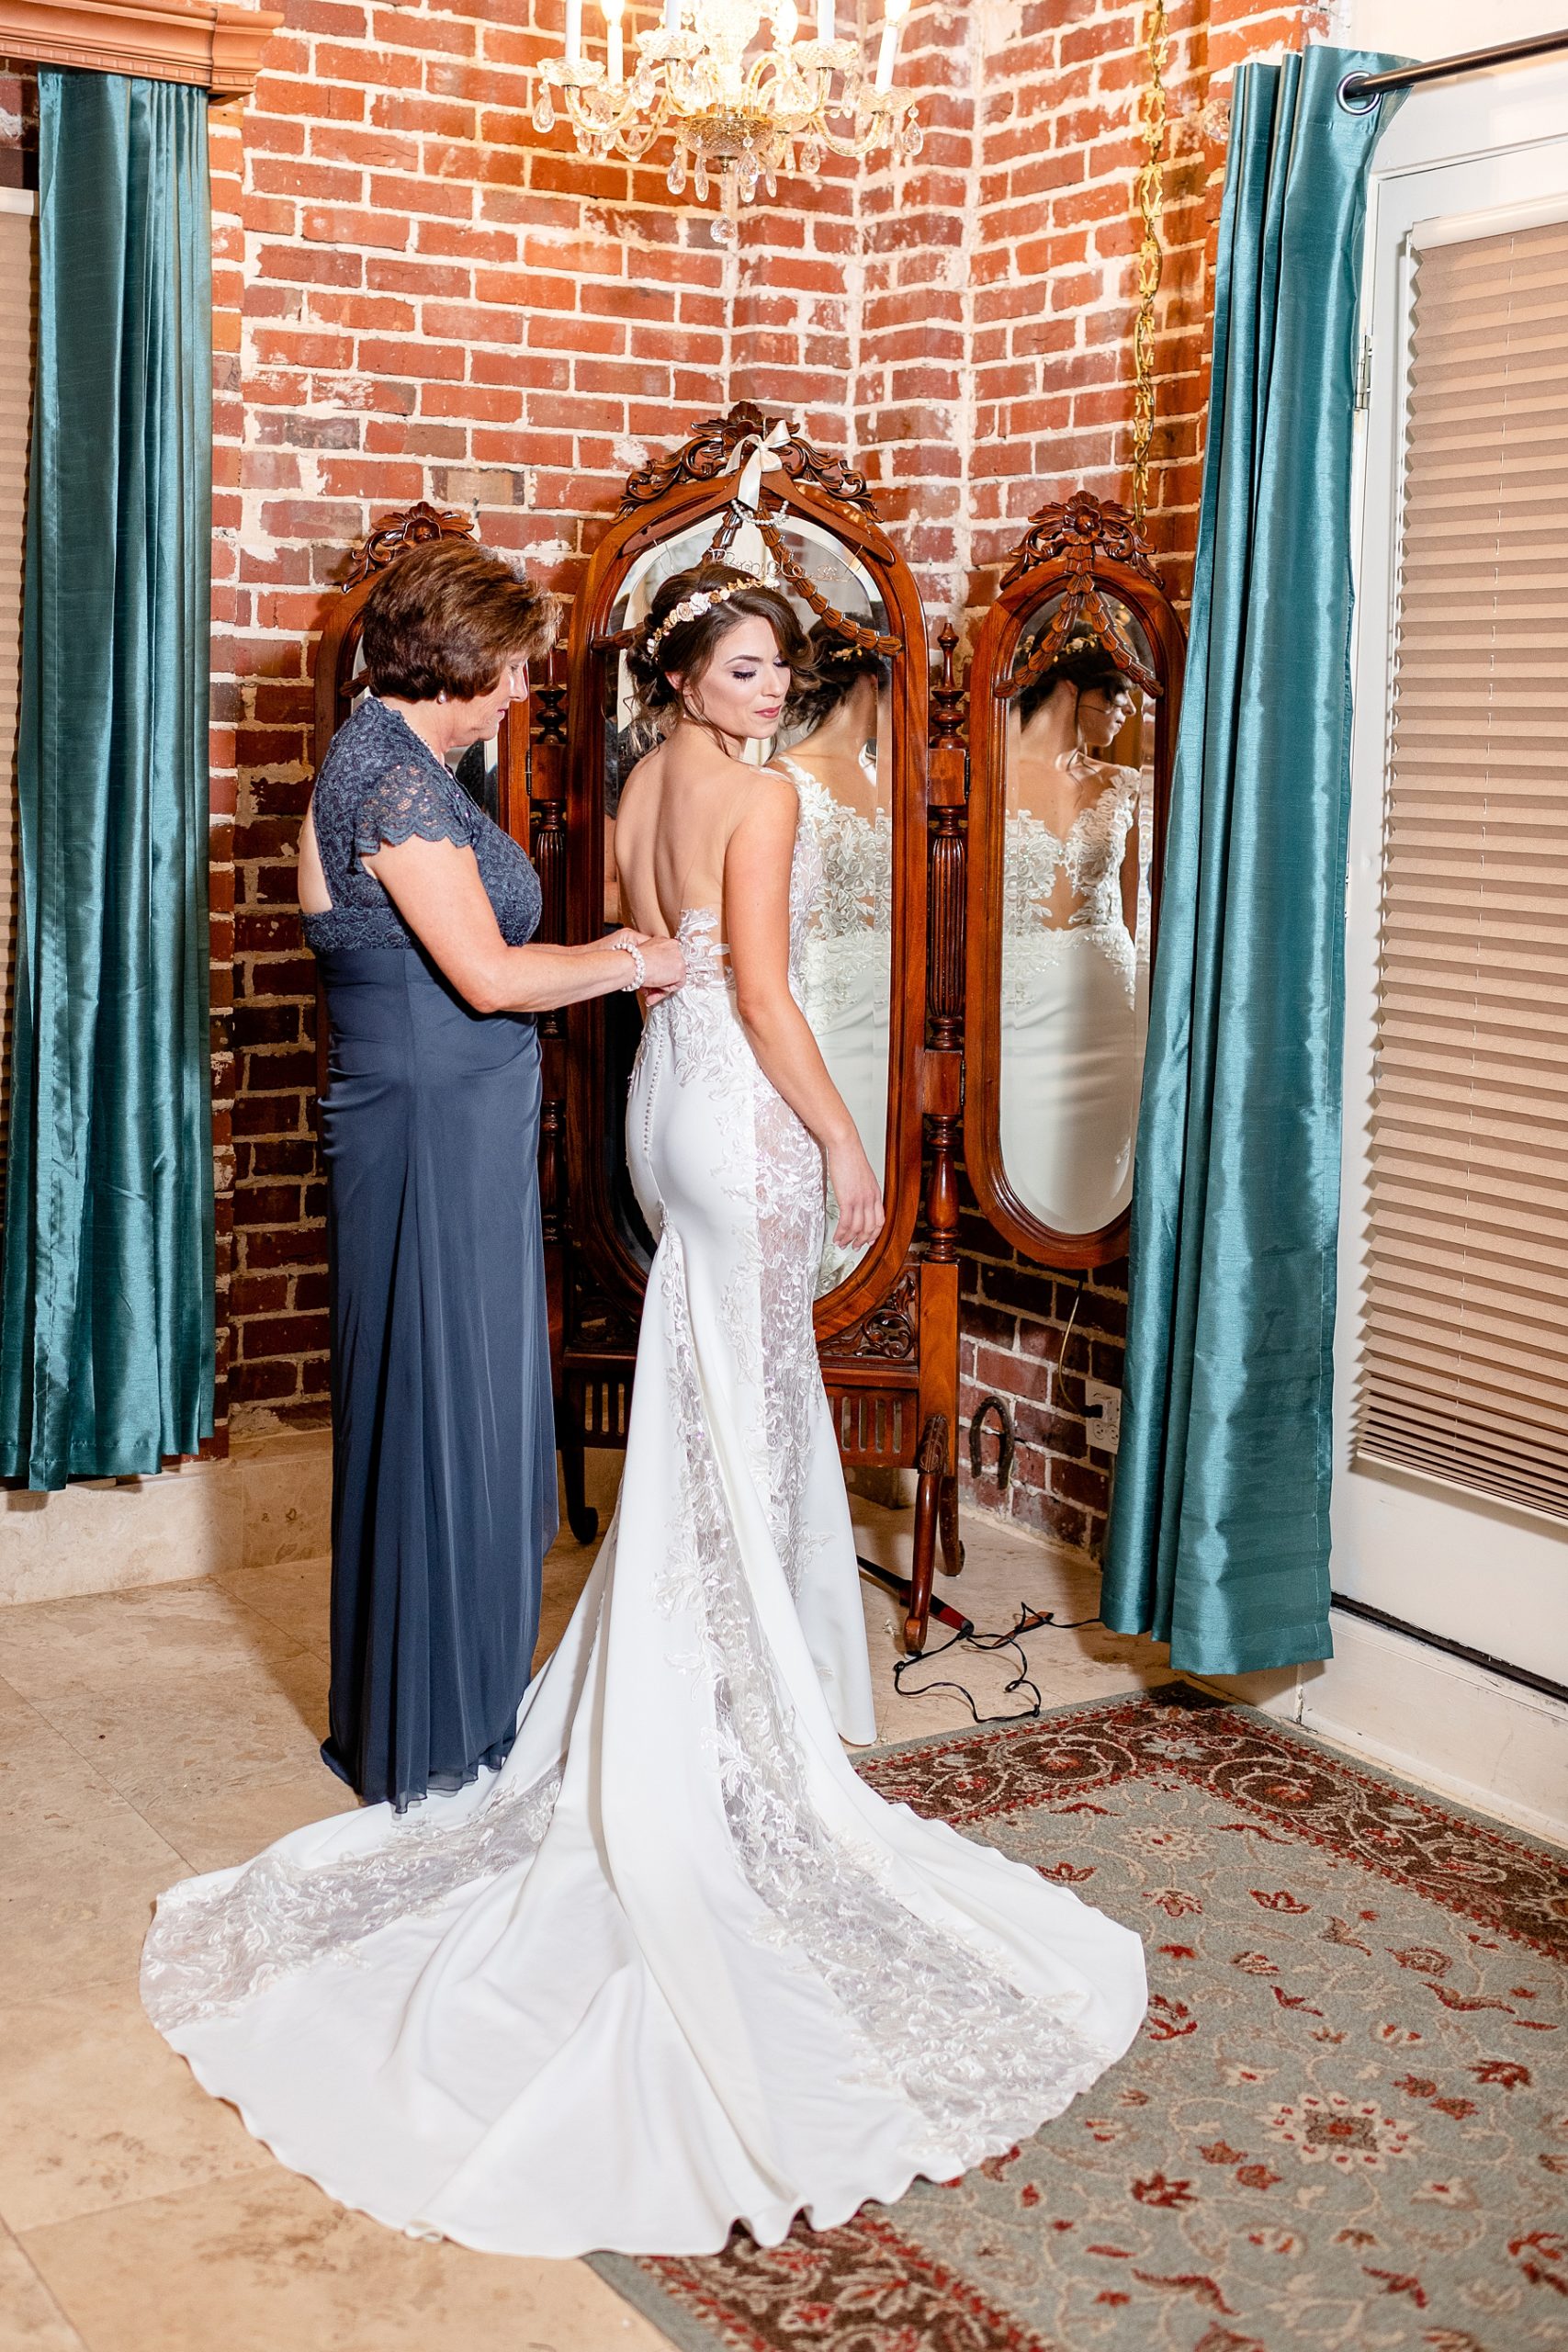 Bride in Wedding Dress | Town Manor | Chynna Pacheco Photography